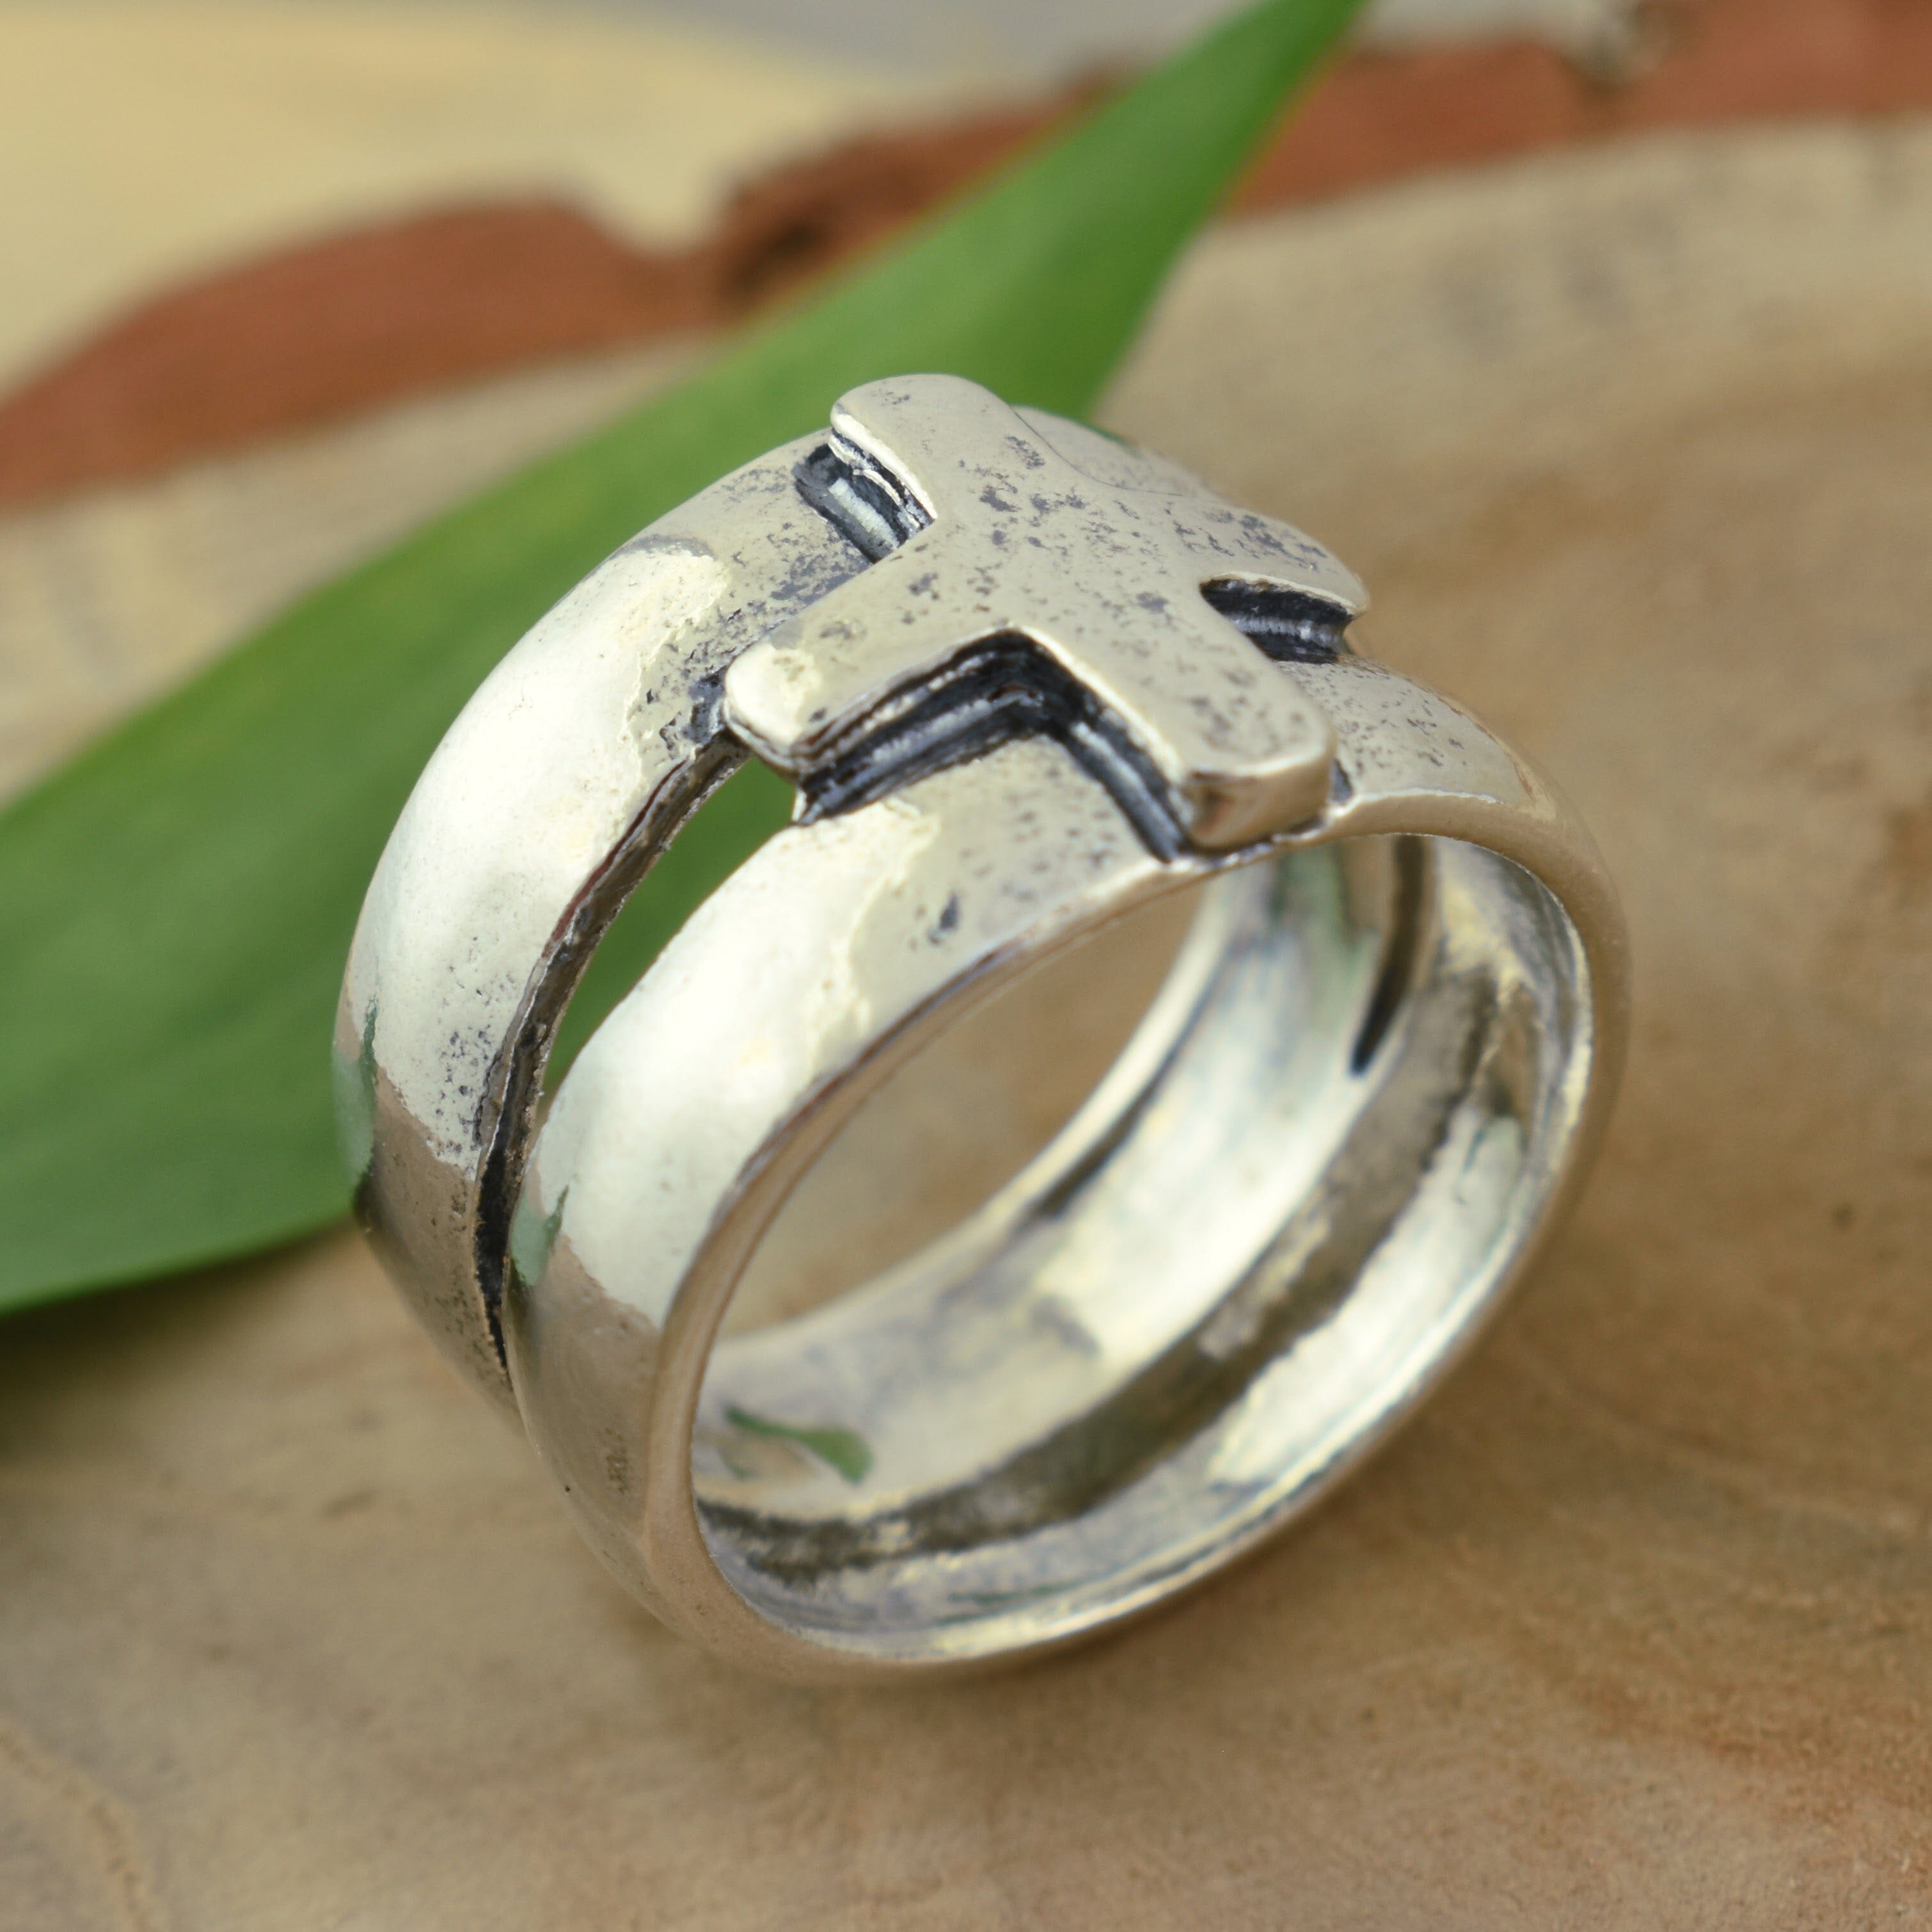 women's Christian ring featuring a cross in the center